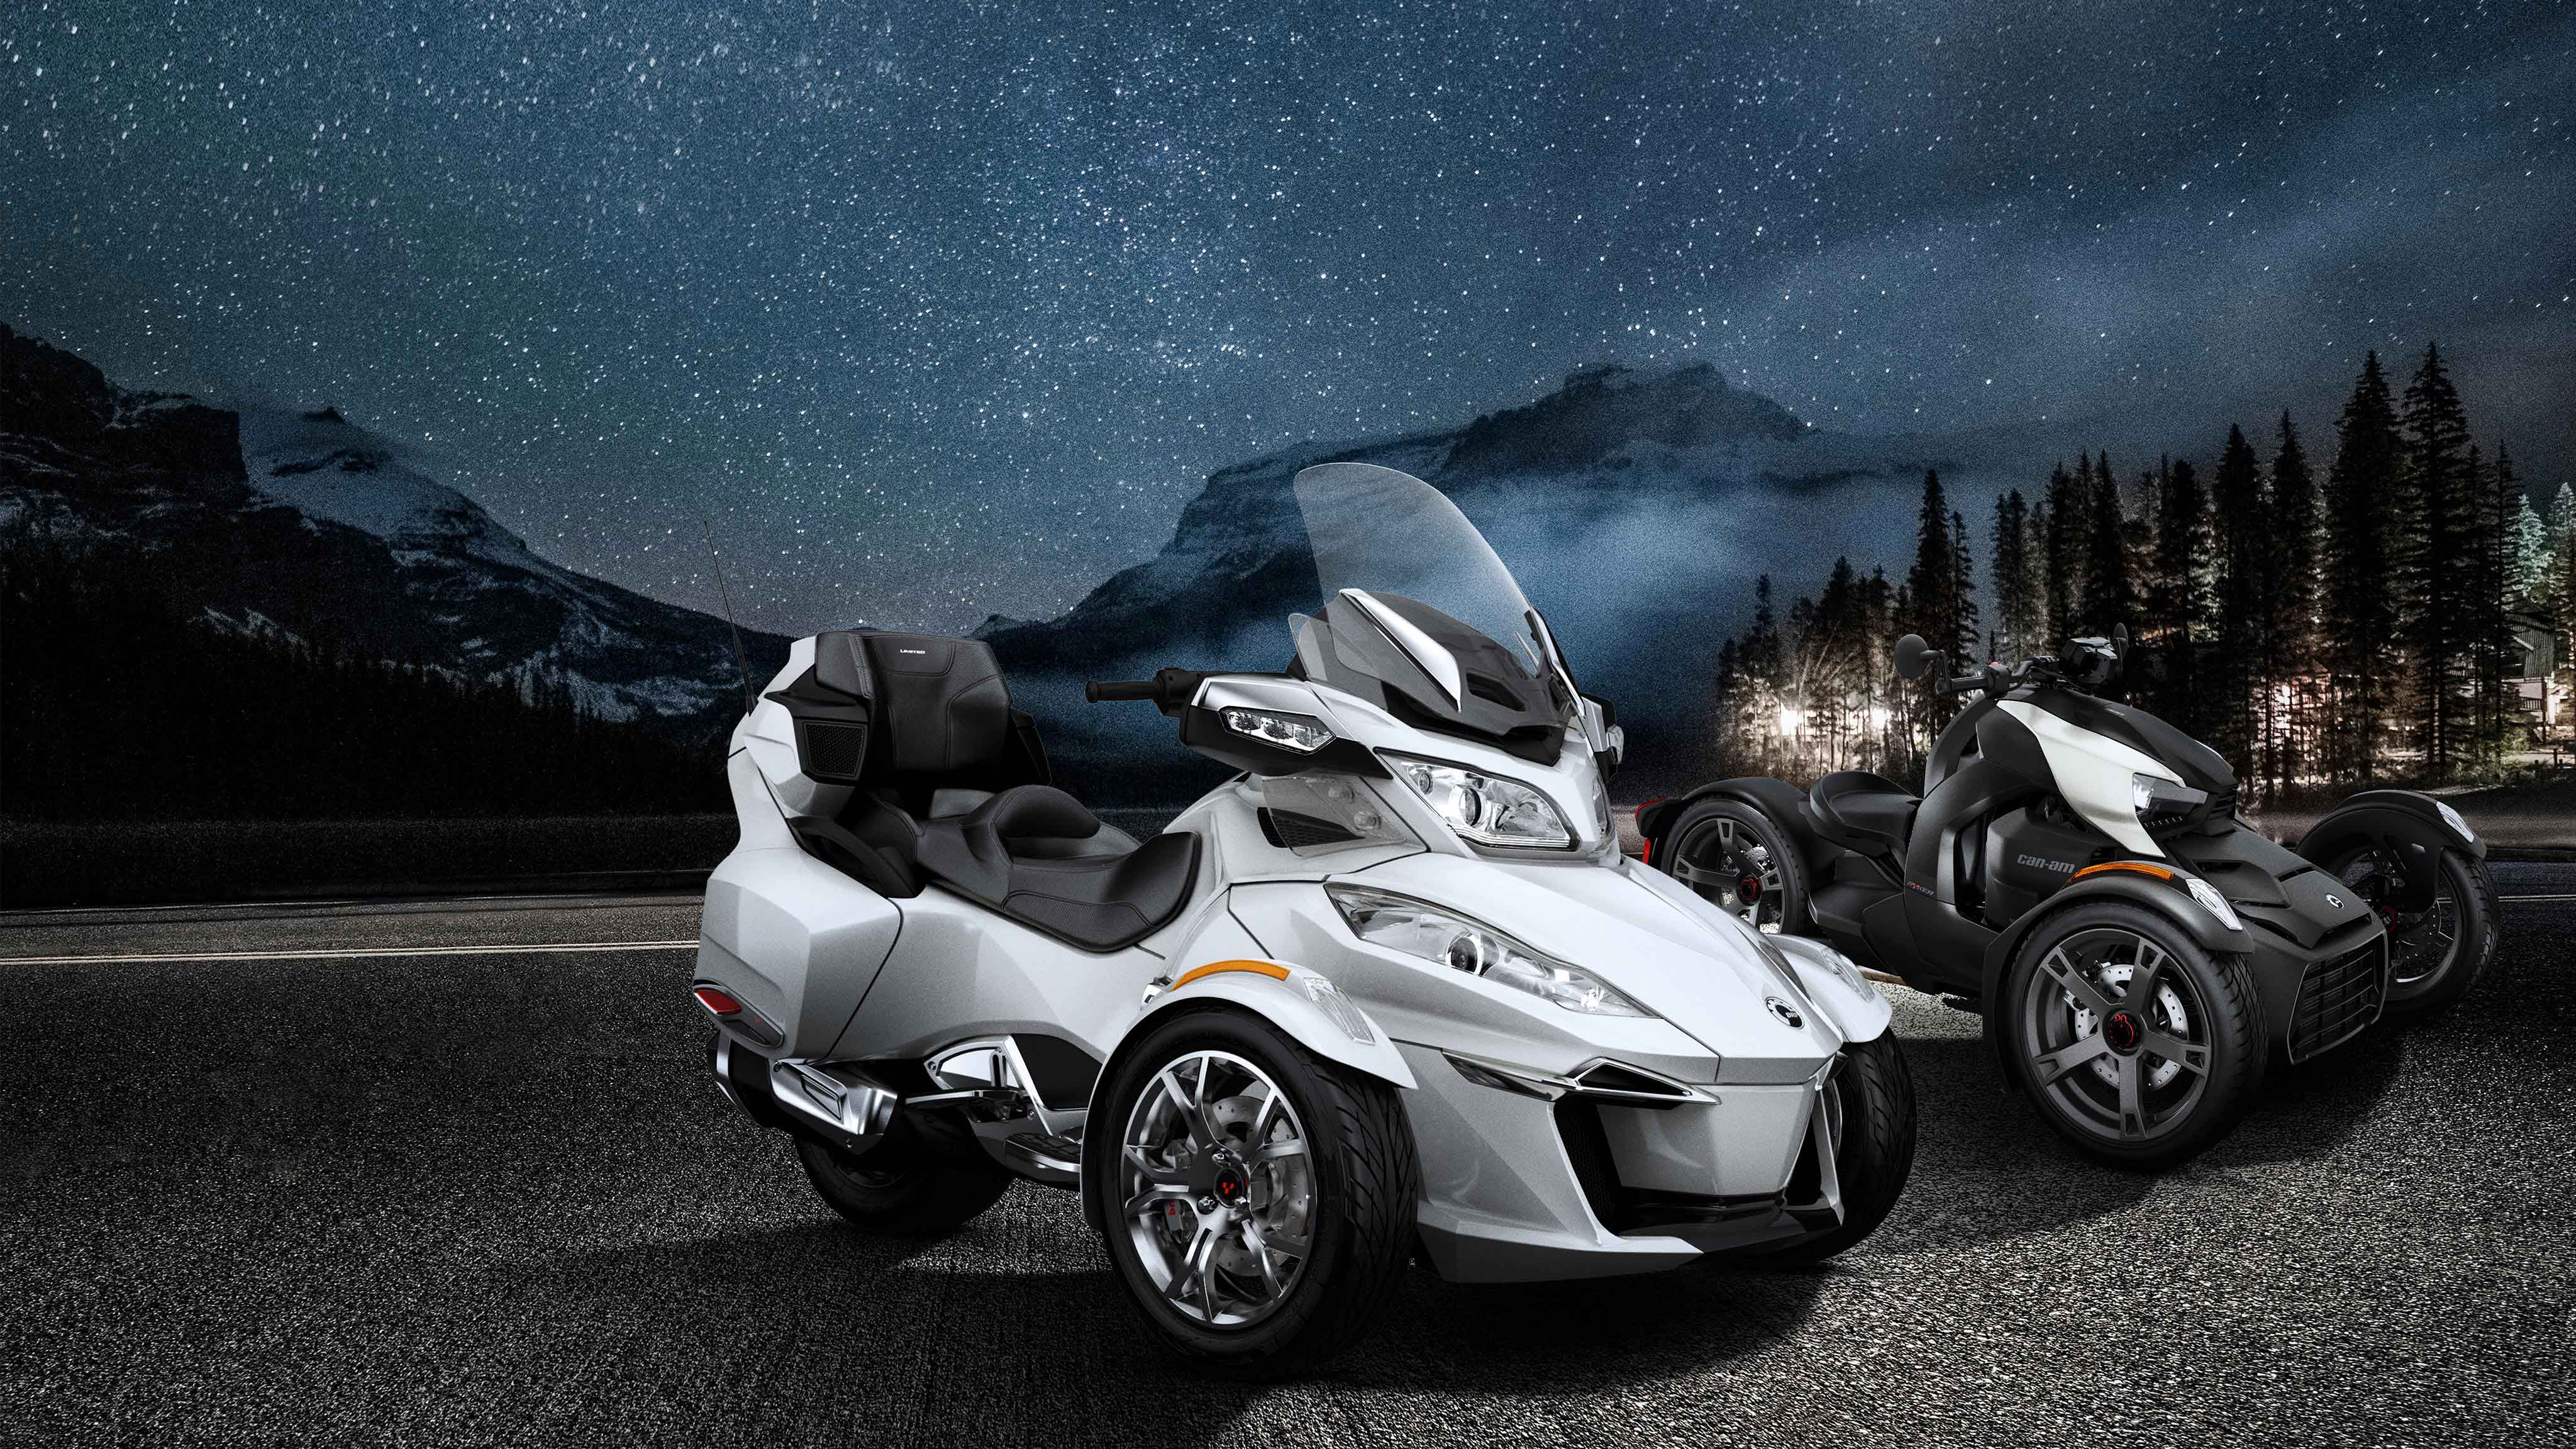 2 Can-Am vehicles at night